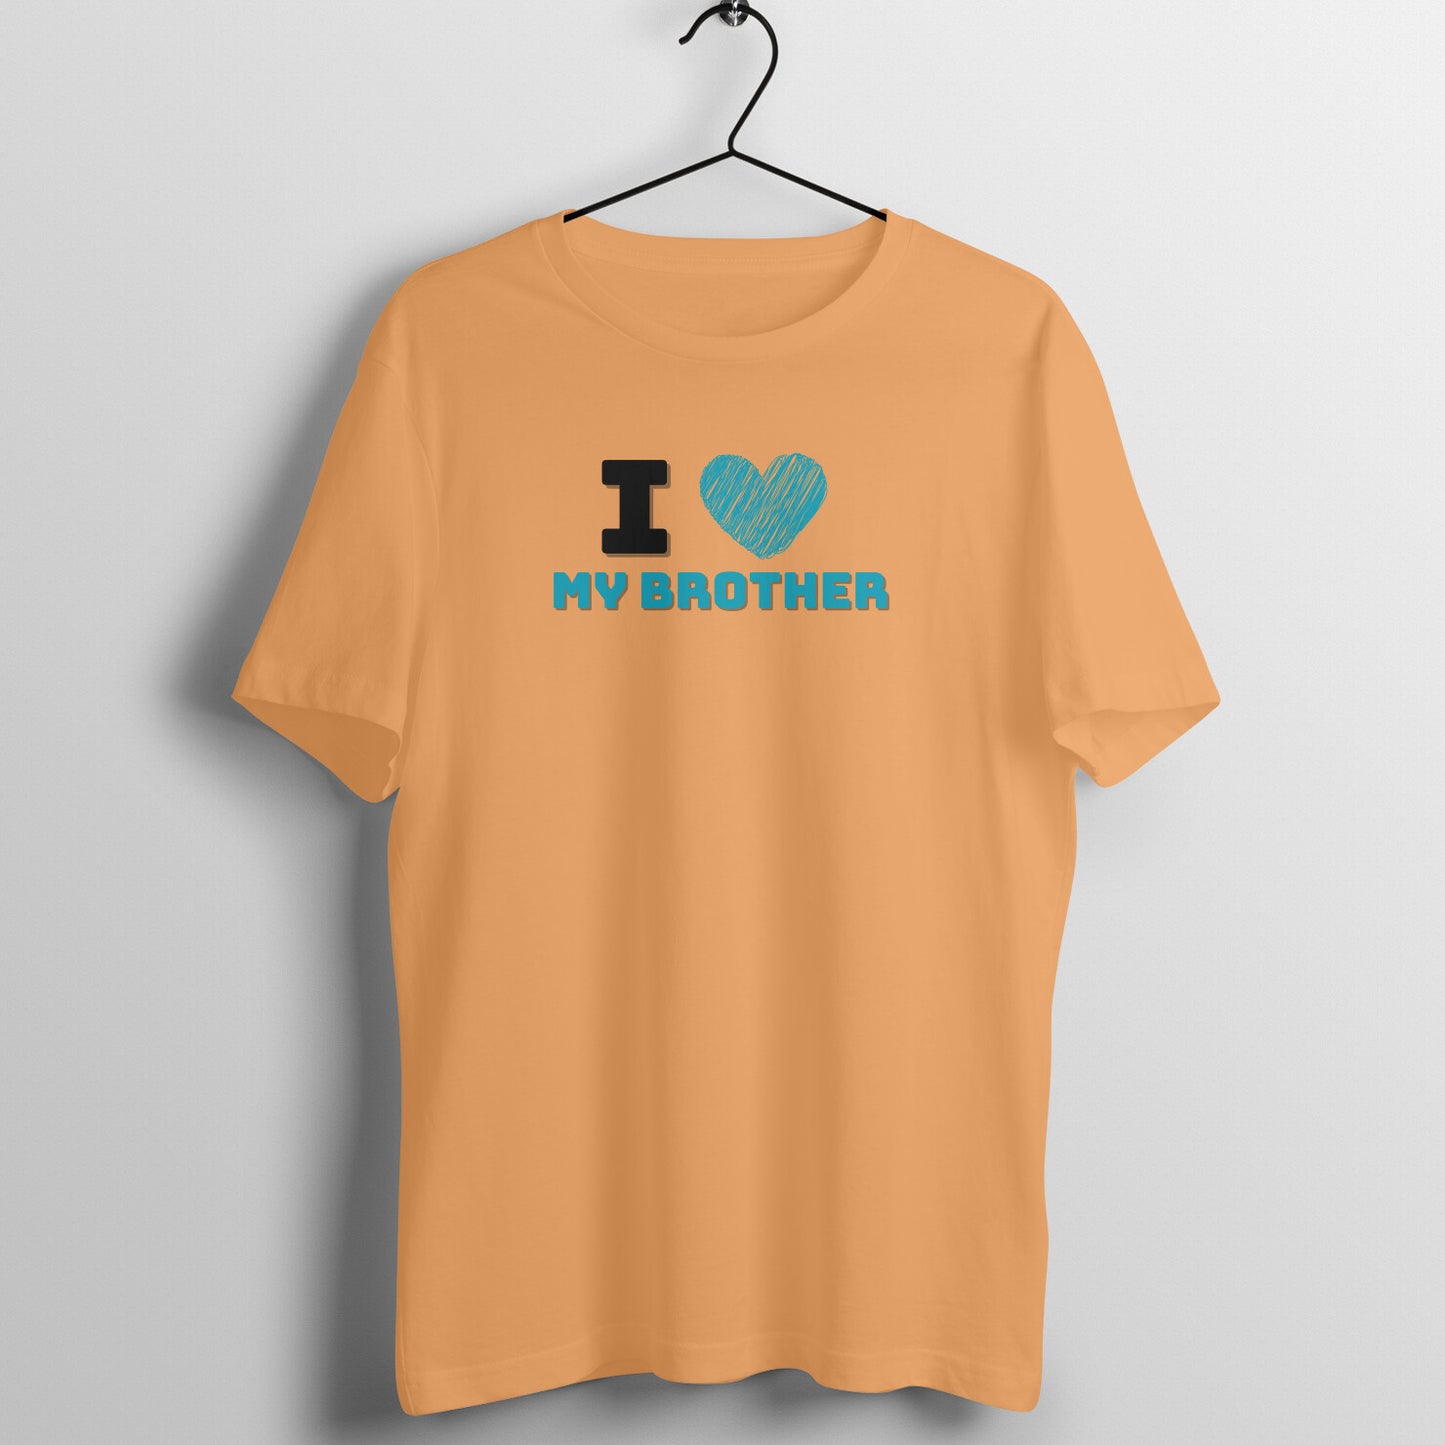 I Love my brother Unisex T-Shirt